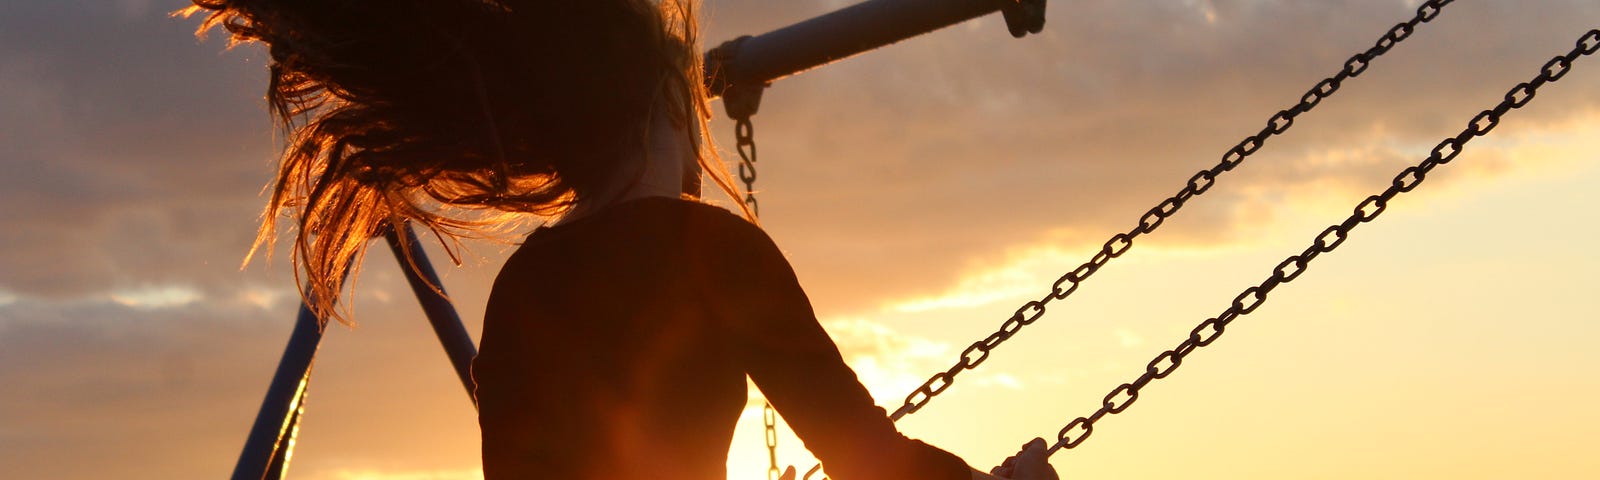 Woman on a swing at a beach with the setting sun behind her.